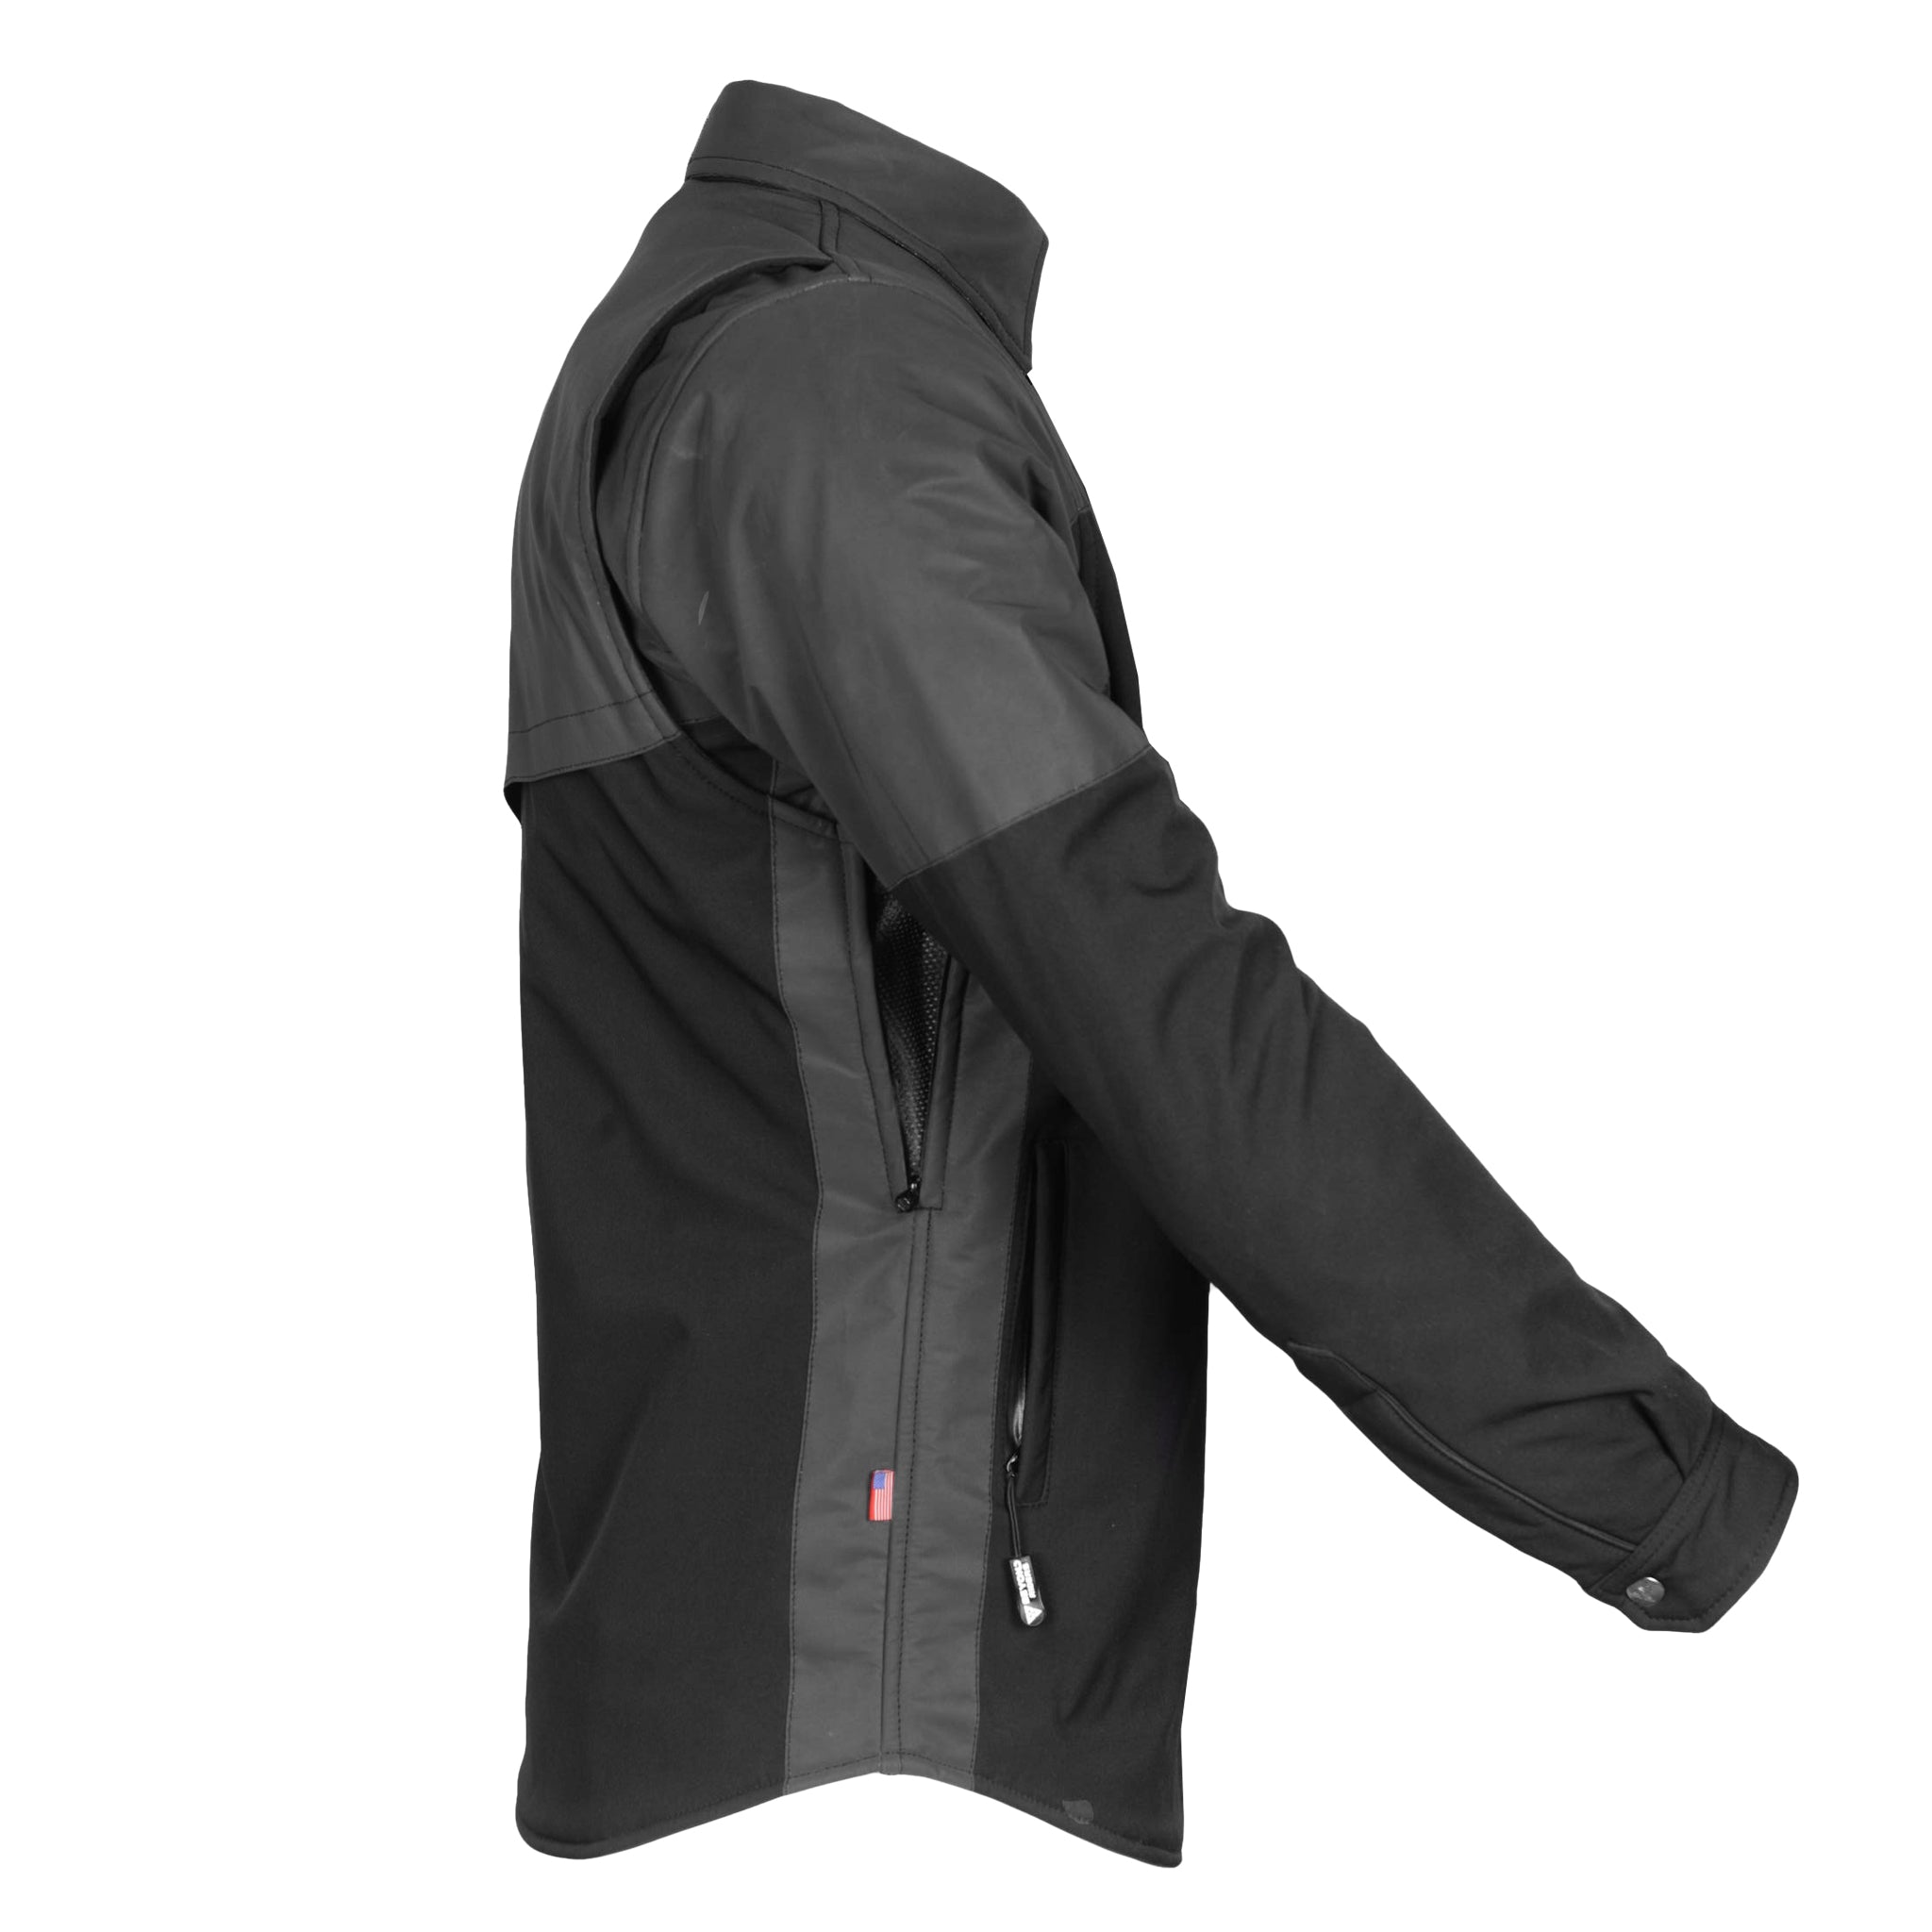 SoftShell-Reflective-Winter-Jacket-for-Men-Black-Matte-With-Raised-Sleeve